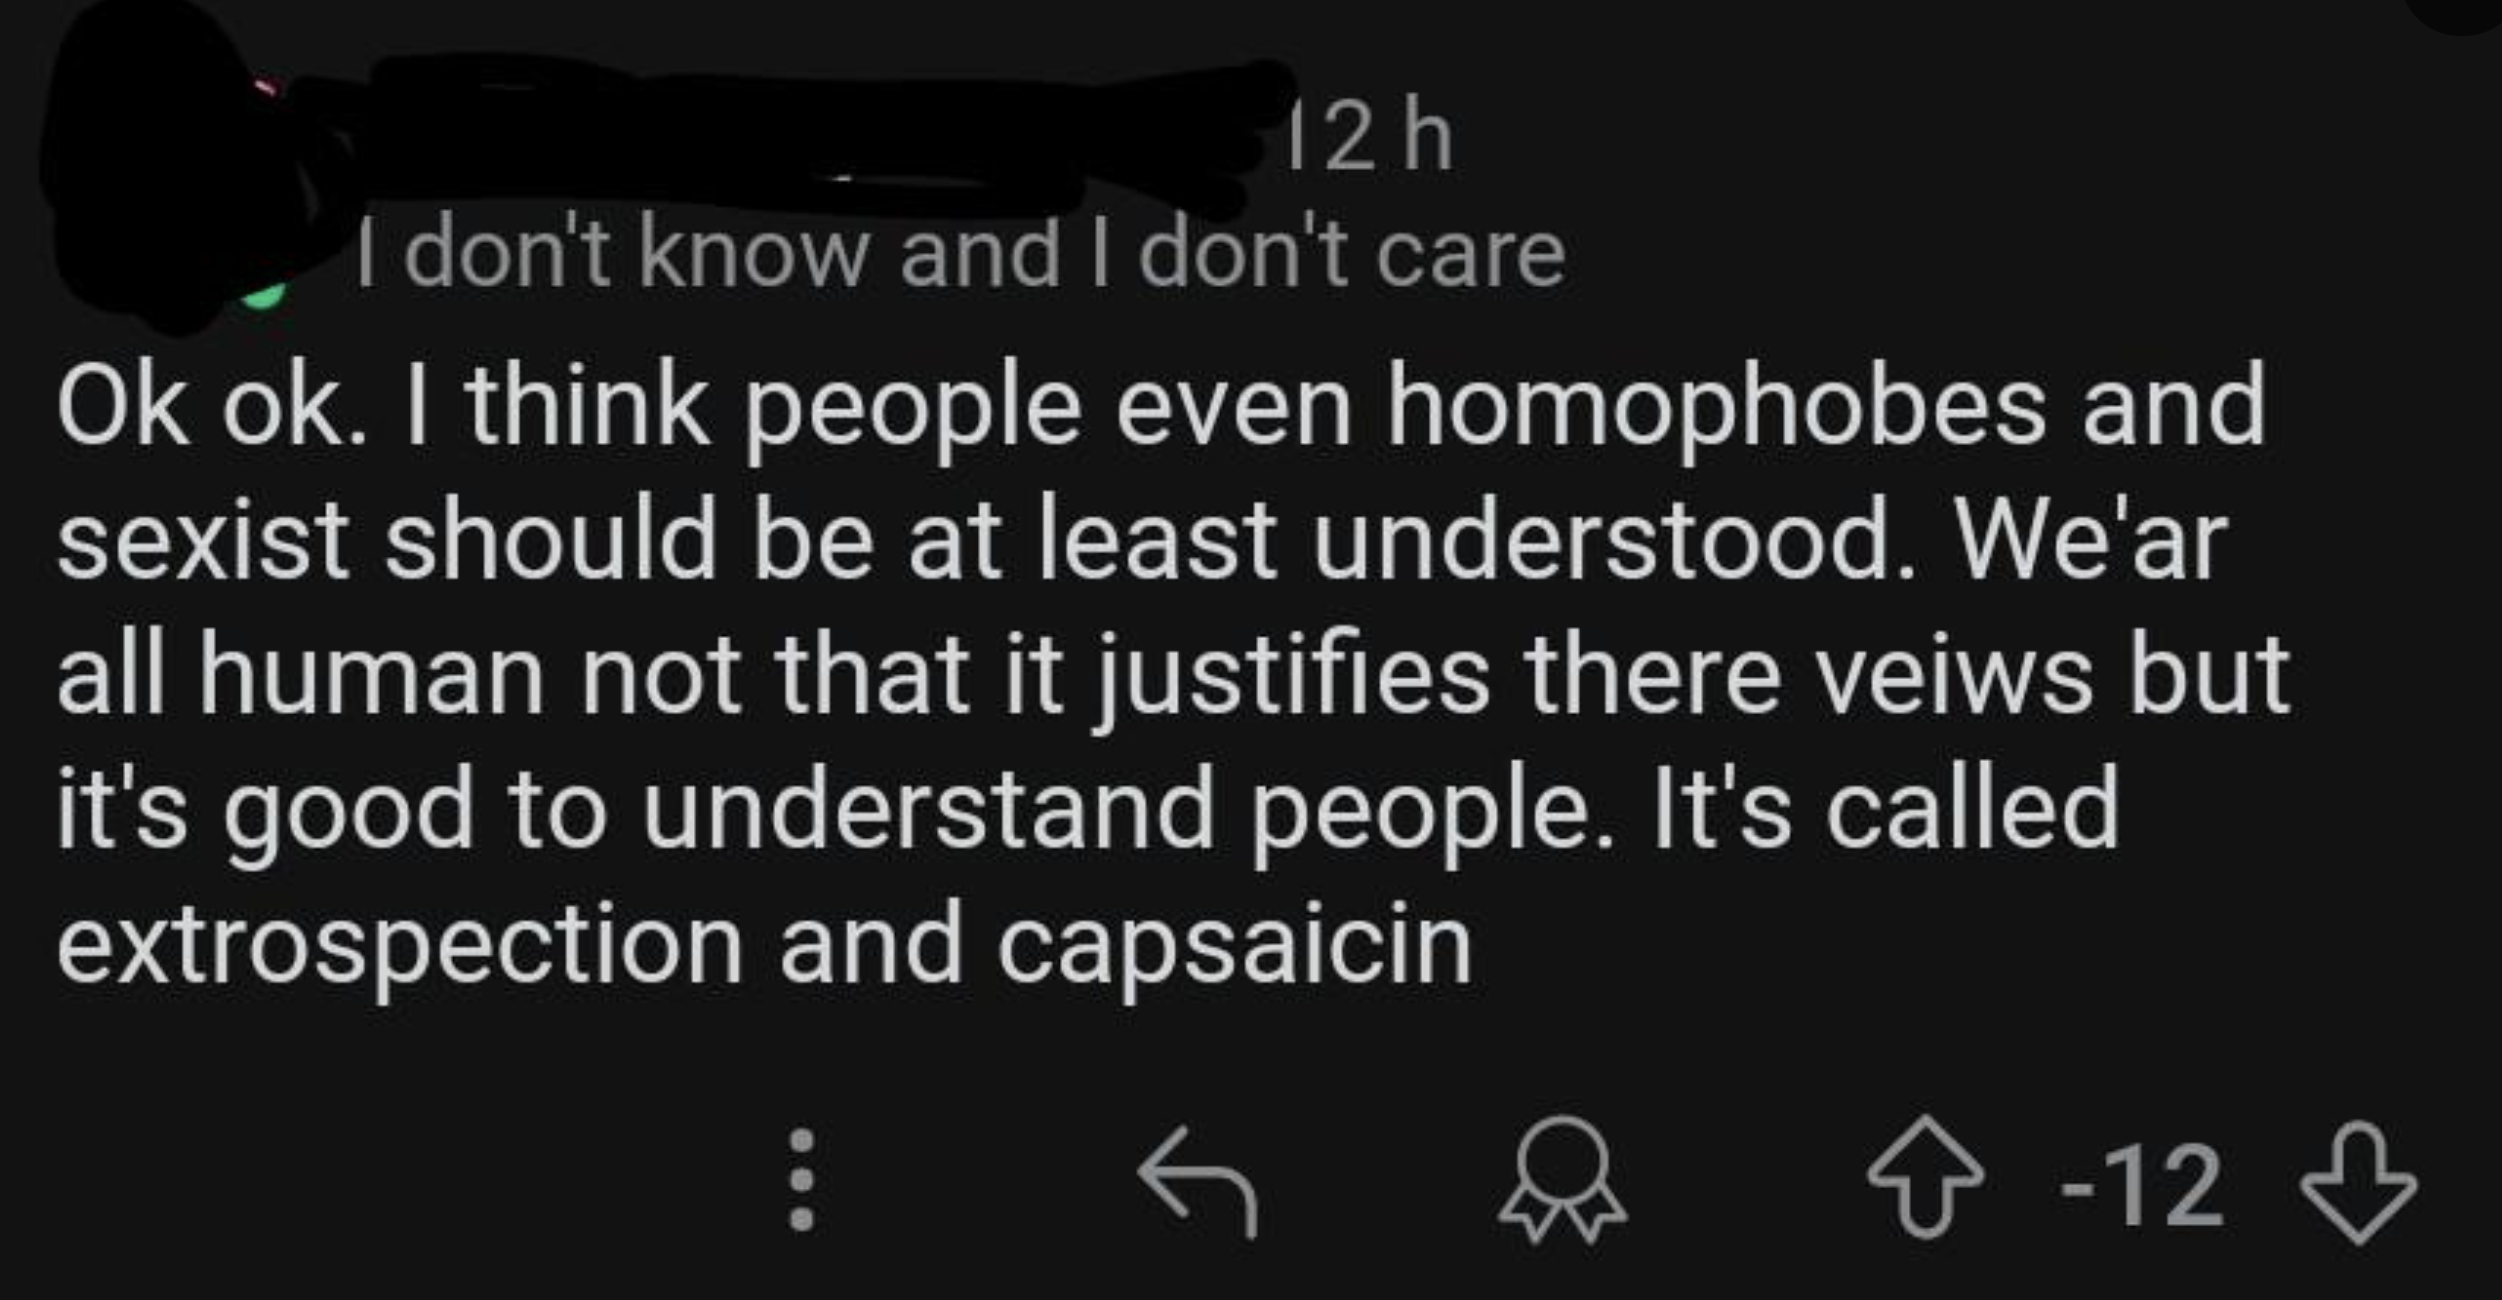 firearm - 12 h I don't know and I don't care Ok ok. I think people even homophobes and sexist should be at least understood. We'ar all human not that it justifies there veiws but it's good to understand people. It's called extrospection and capsaicin 12 1